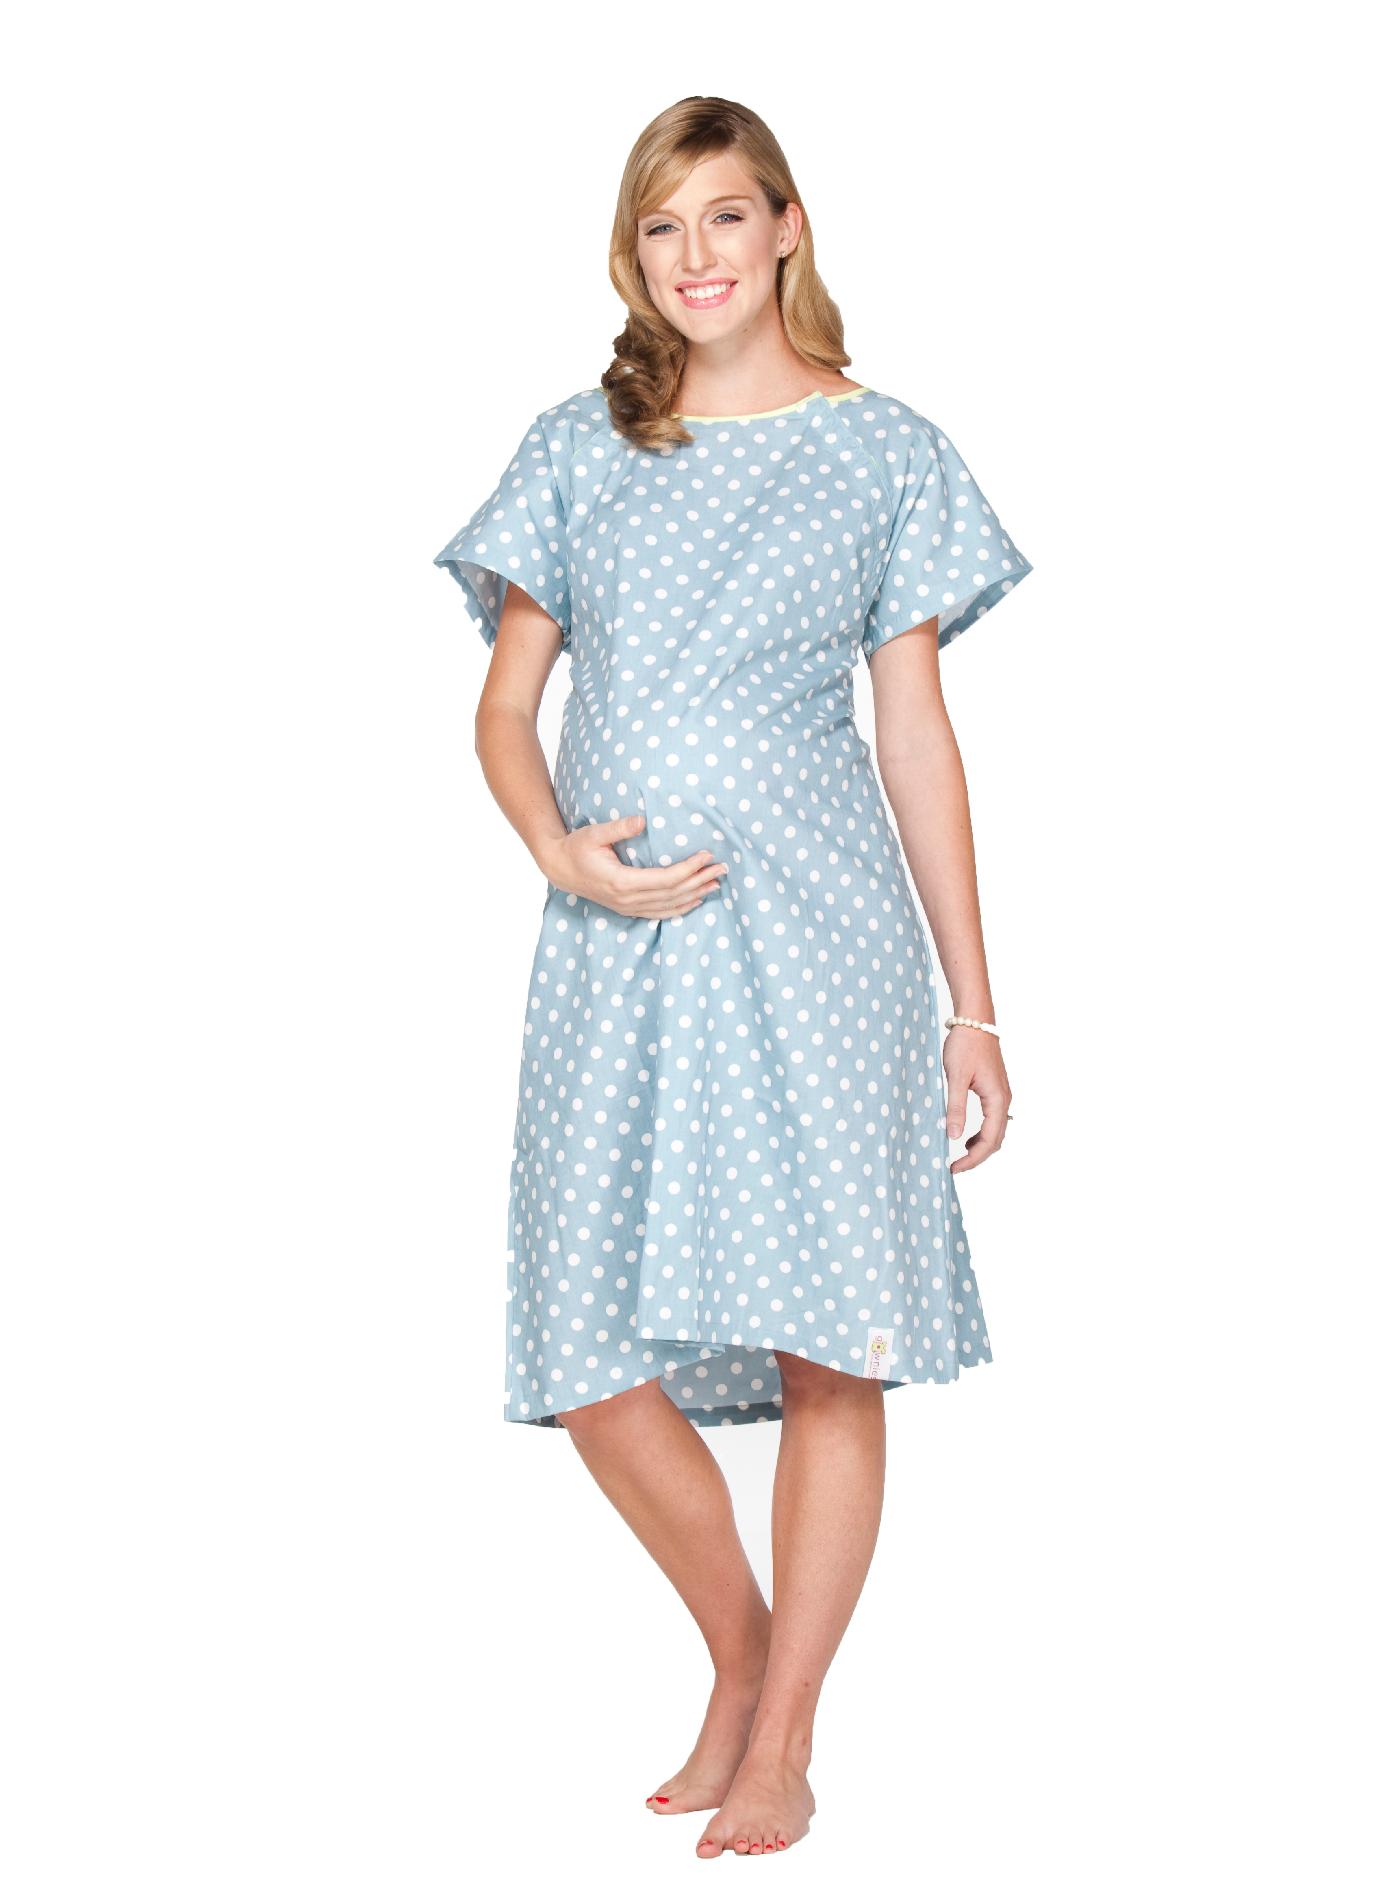 Nicole Gownie Hospital Gown with Pillowcase